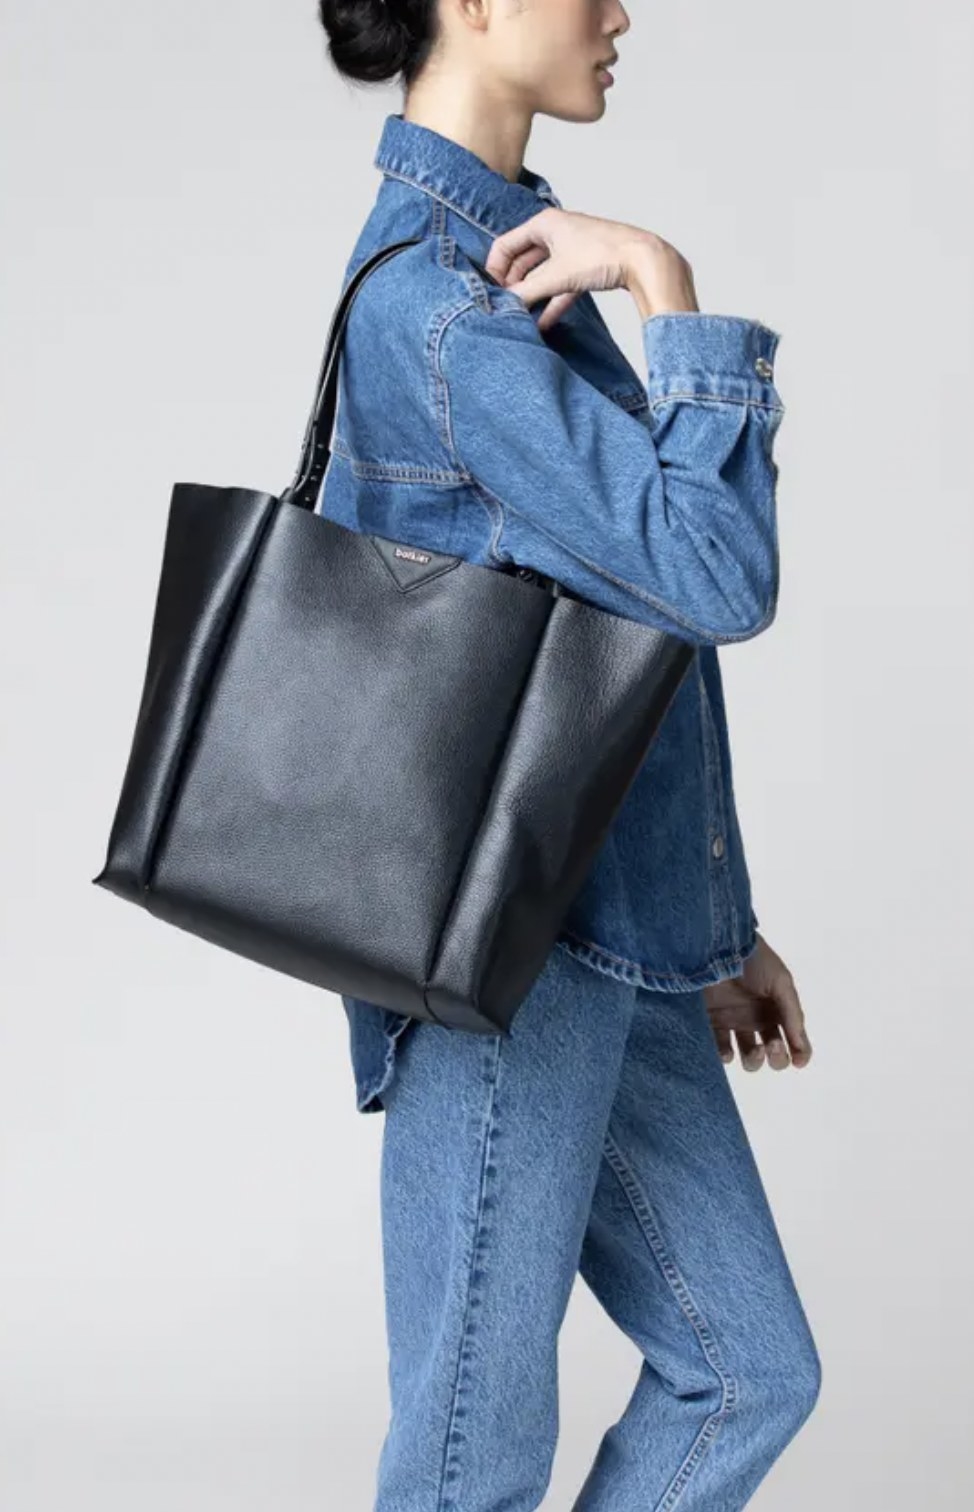 Model with the black leather tote over their shoulder